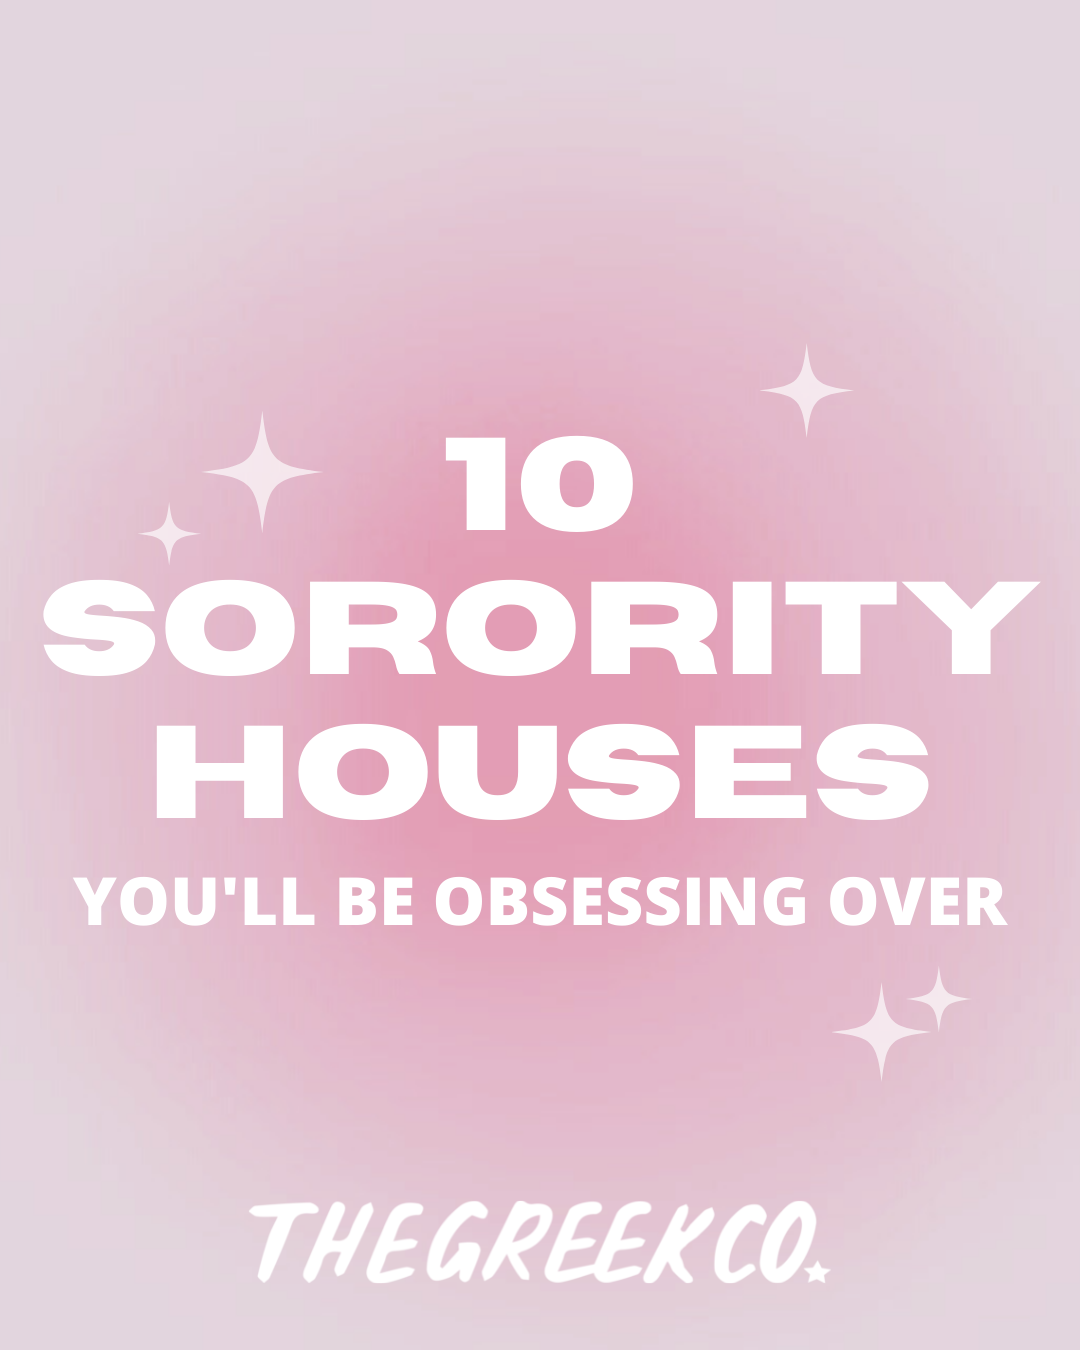 10 Sorority Houses You'll Be Obsessing Over - The Greek Co. Blog Post